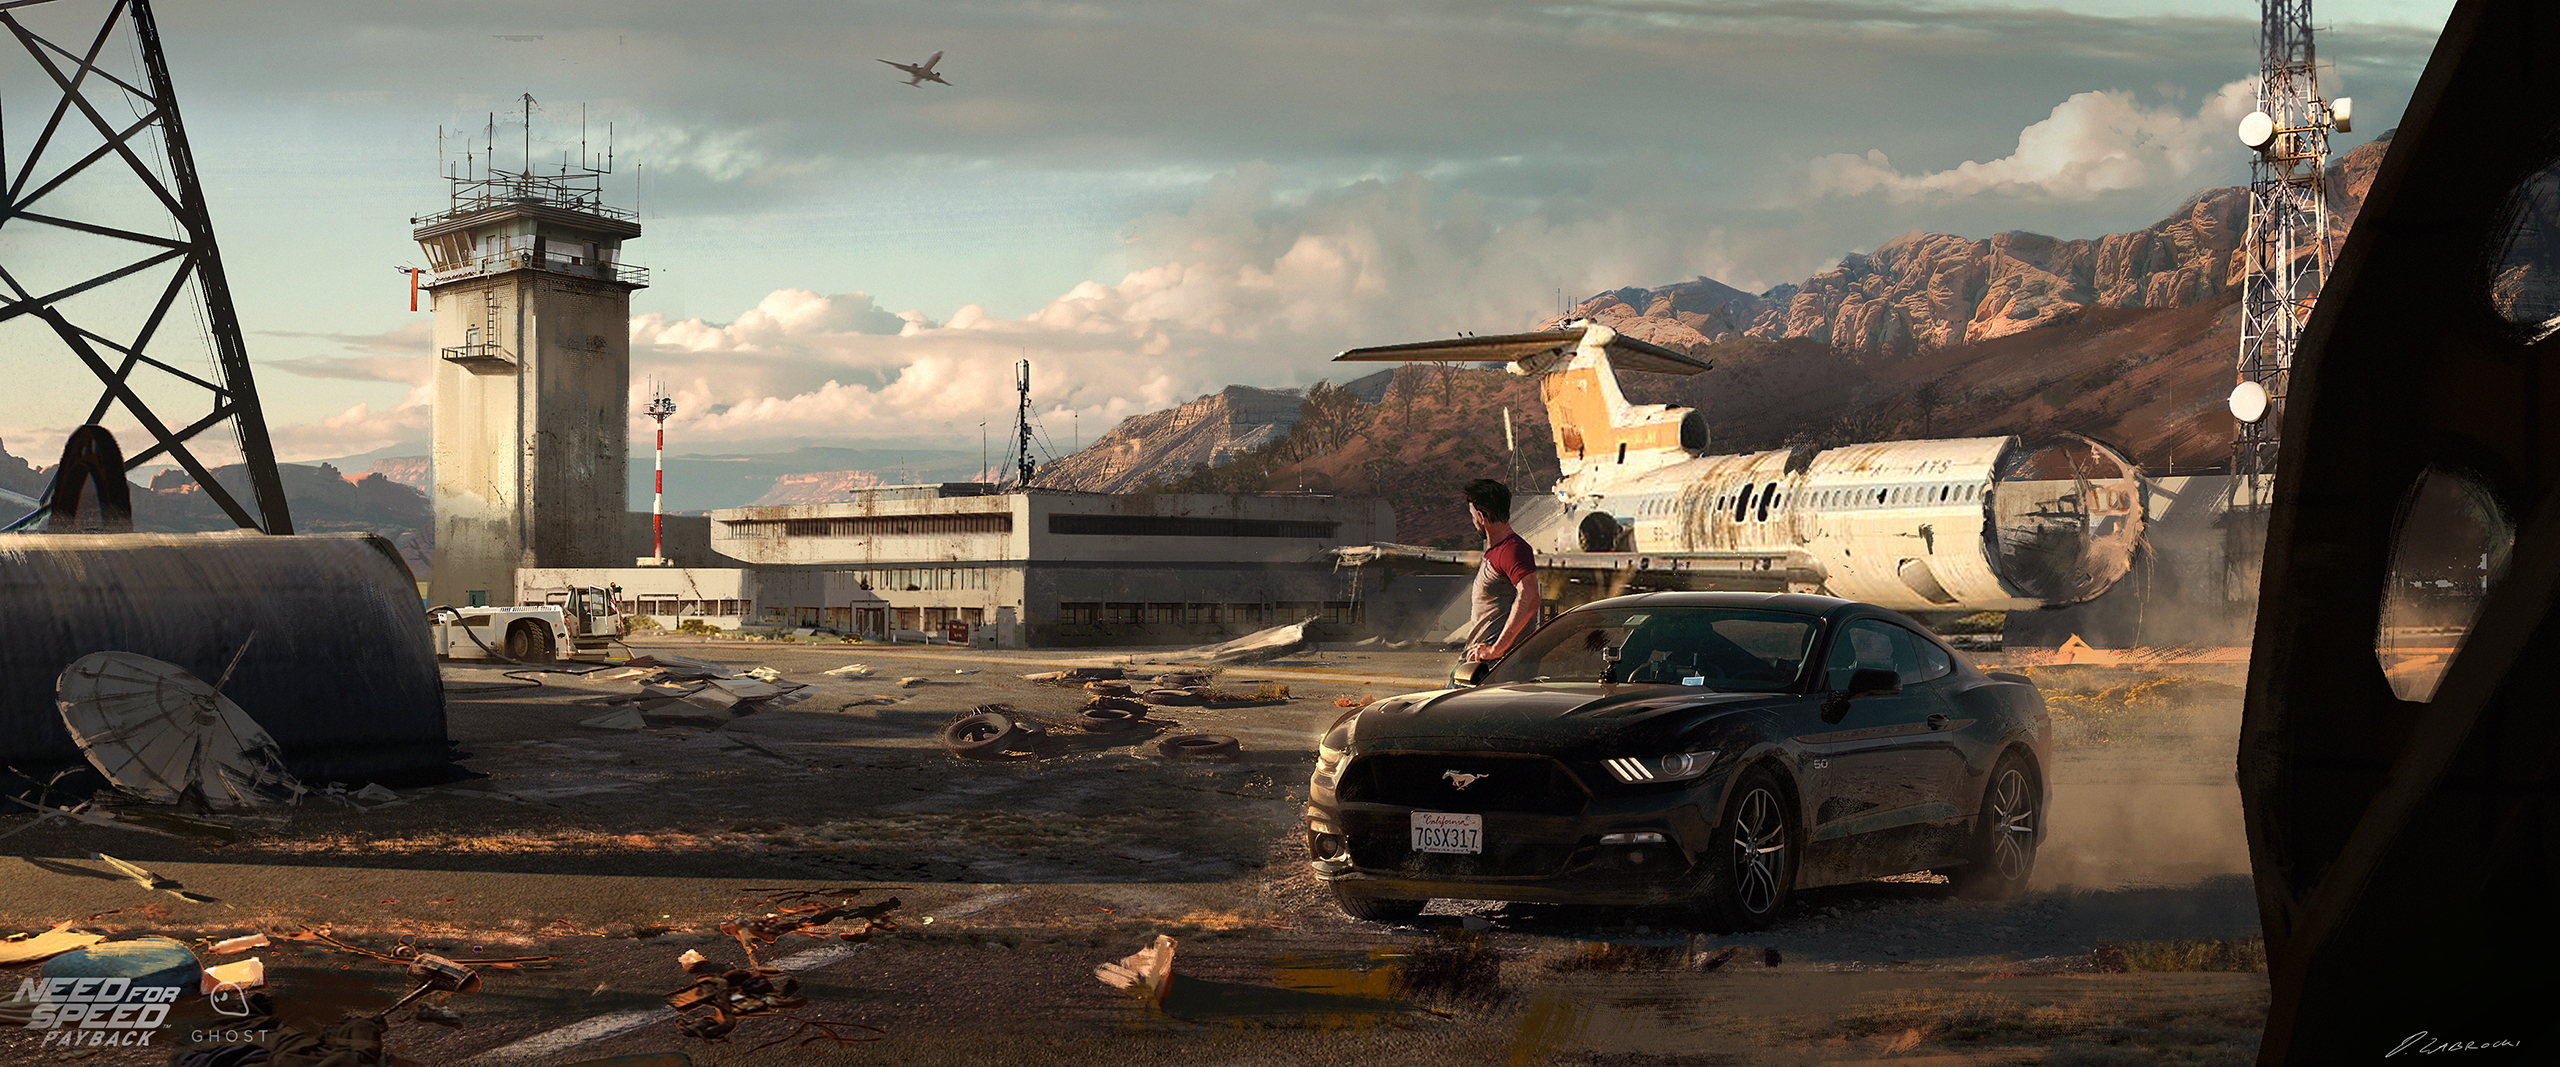 720p need for speed payback backgrounds